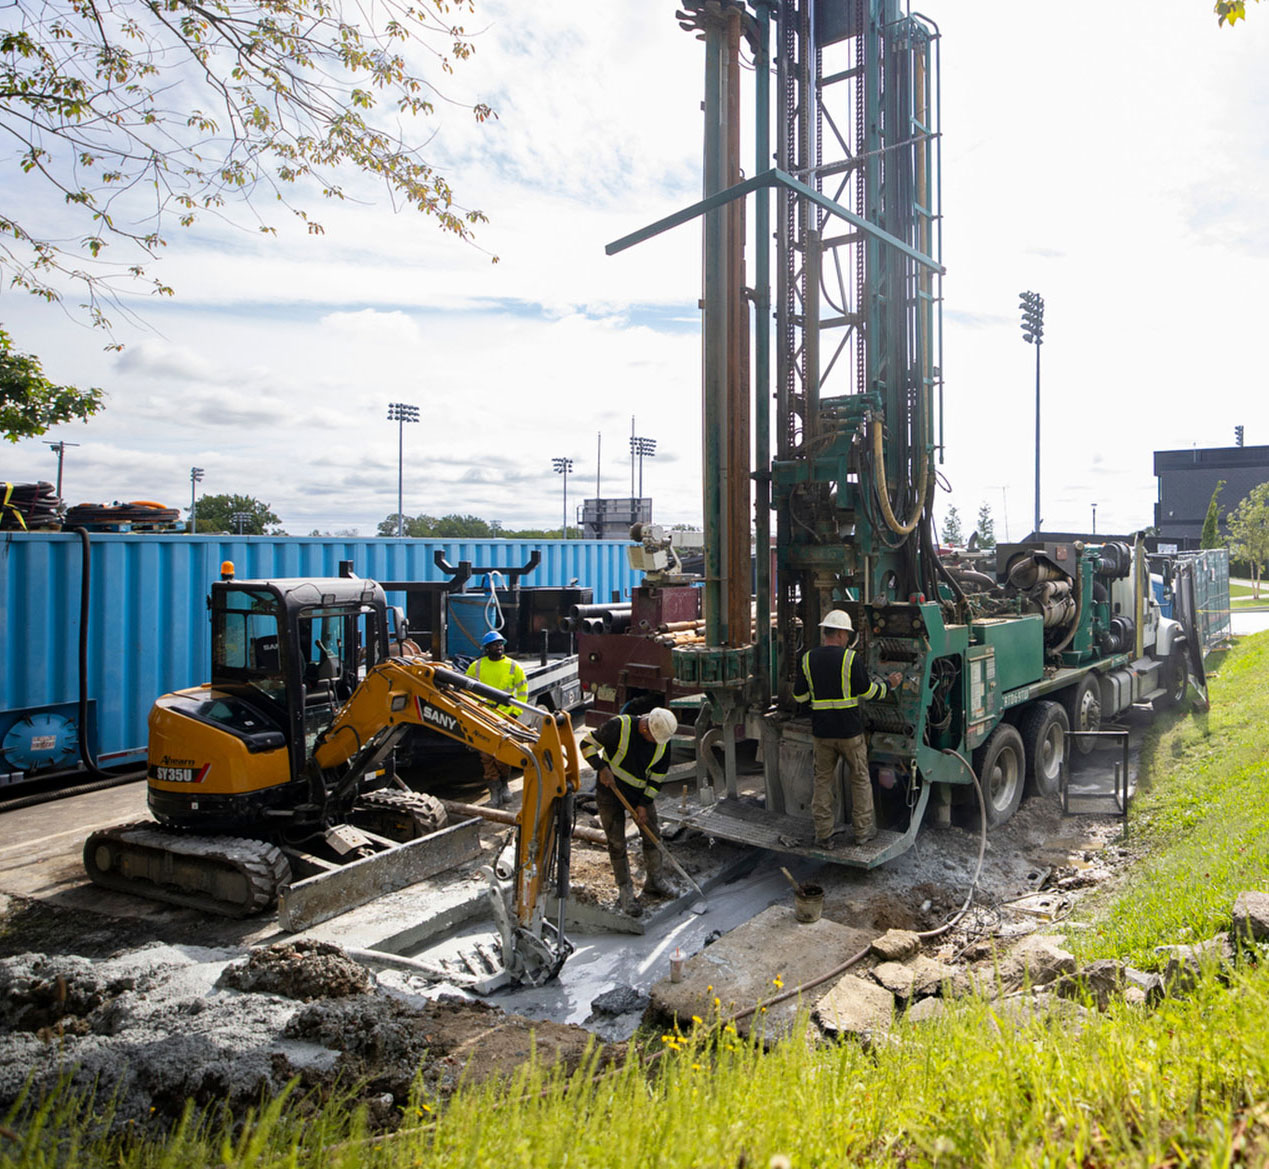 One of three campus locations chosen as sites for geothermal test-wells.